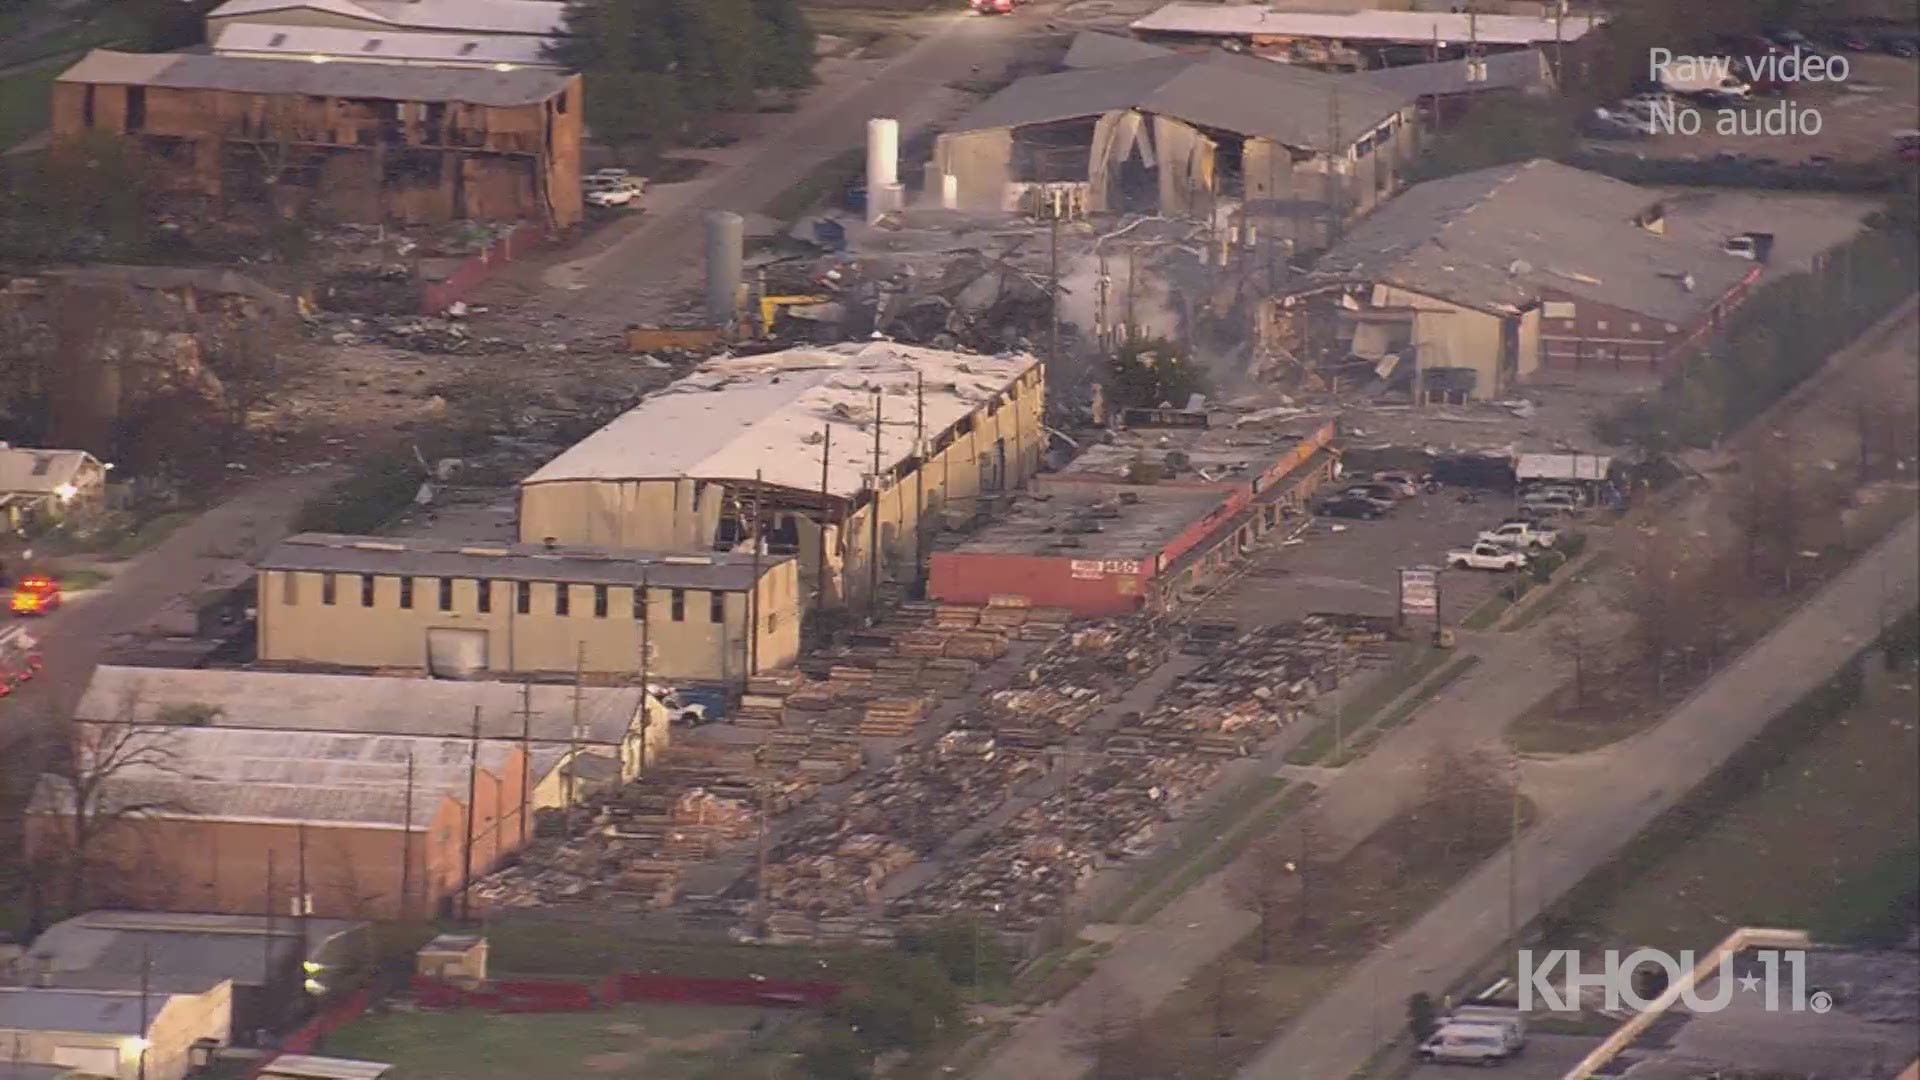 The first daylight look at the aftermath in northwest Houston where an industrial explosion occurred early Friday, Jan. 24, 2020.